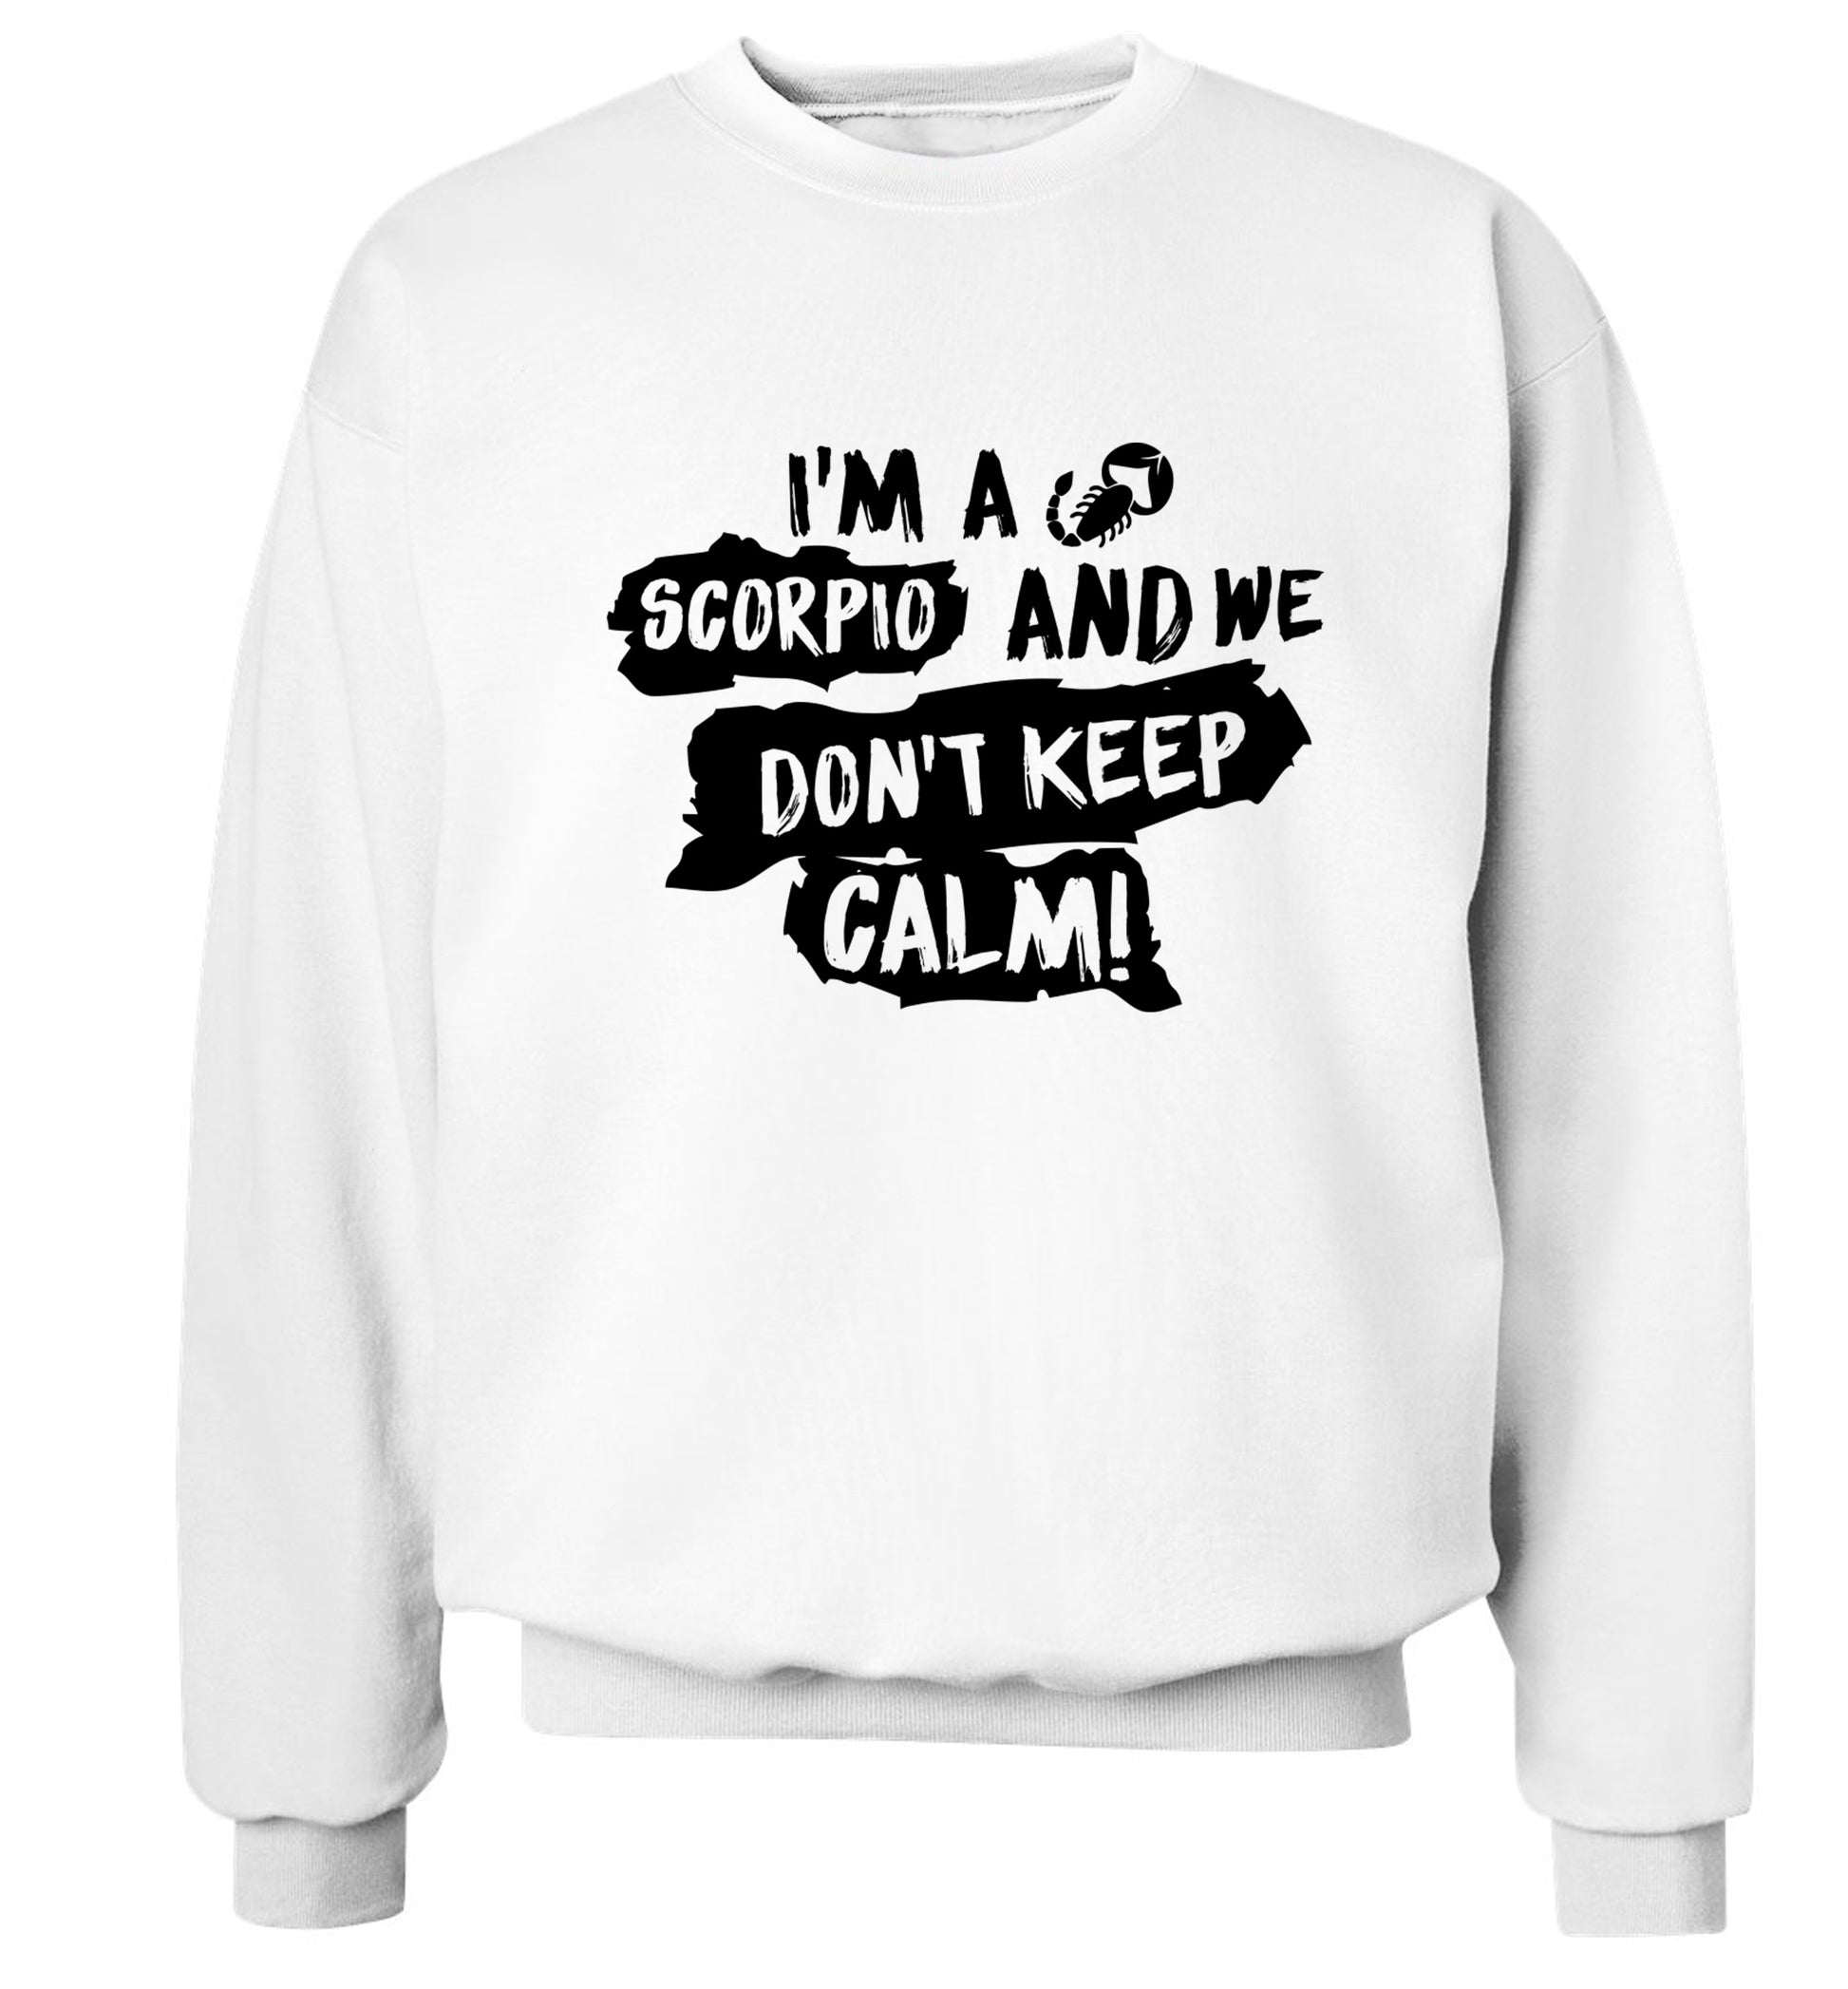 I'm a scorpio and we don't keep calm Adult's unisex white Sweater 2XL